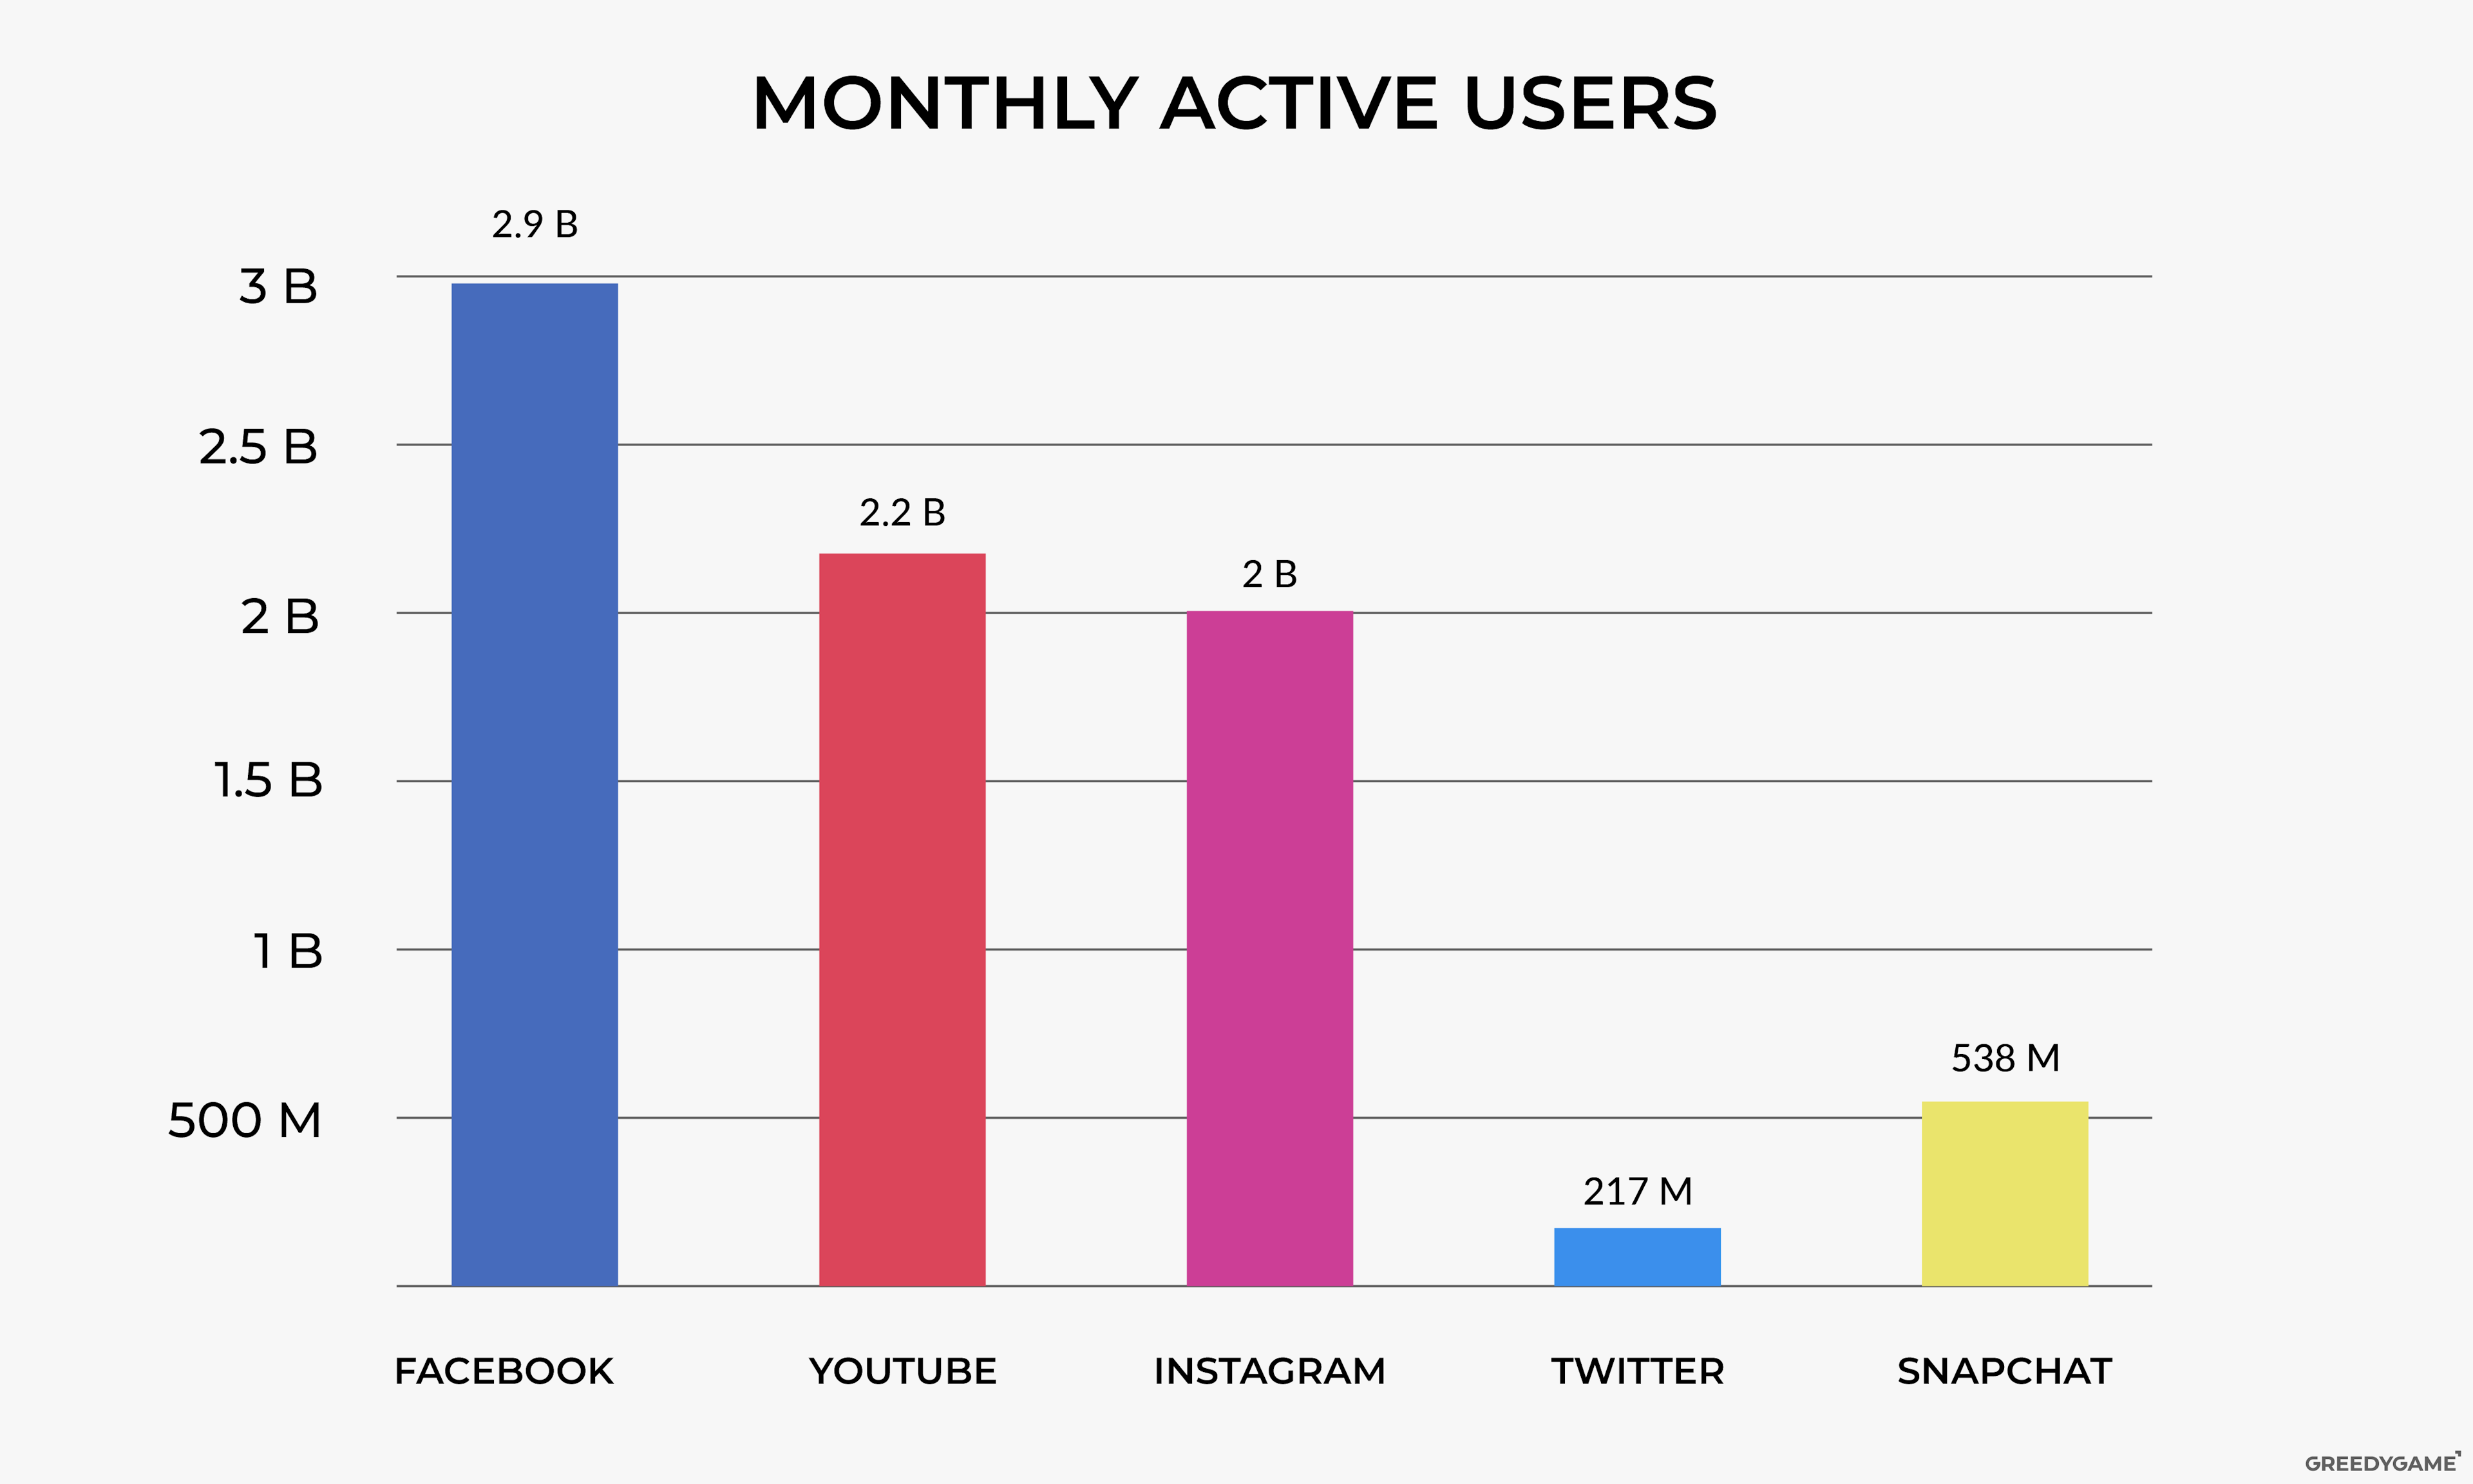 Bar graph showing the number of monthly active users for popular social media platforms